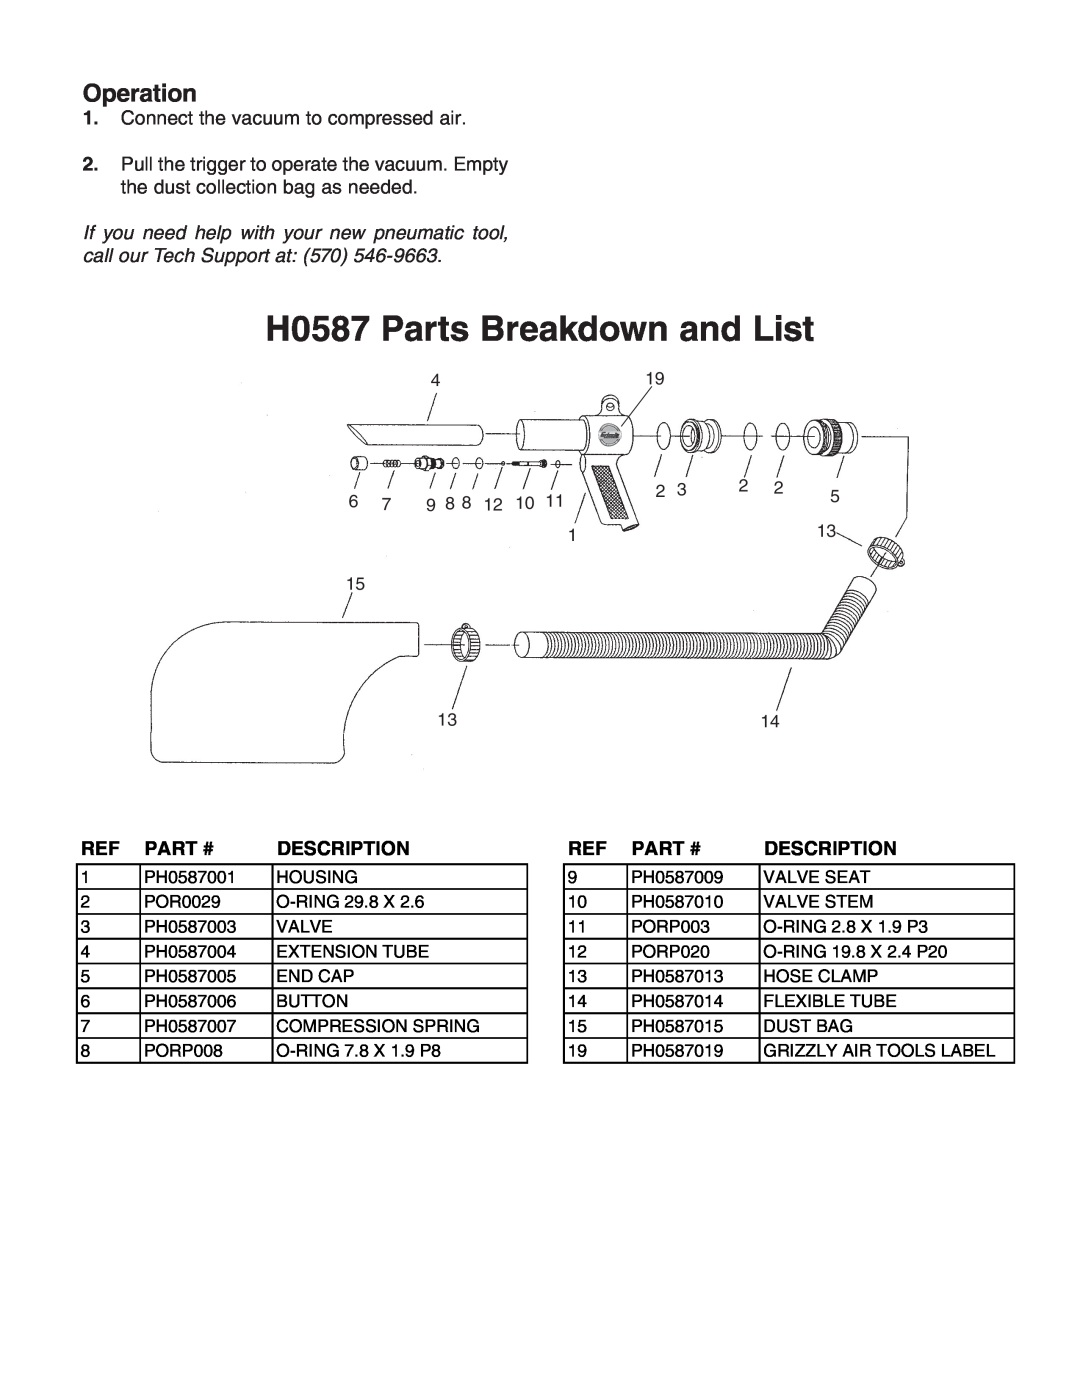 Grizzly specifications Operation, Connect the vacuum to compressed air, H0587 Parts Breakdown and List 